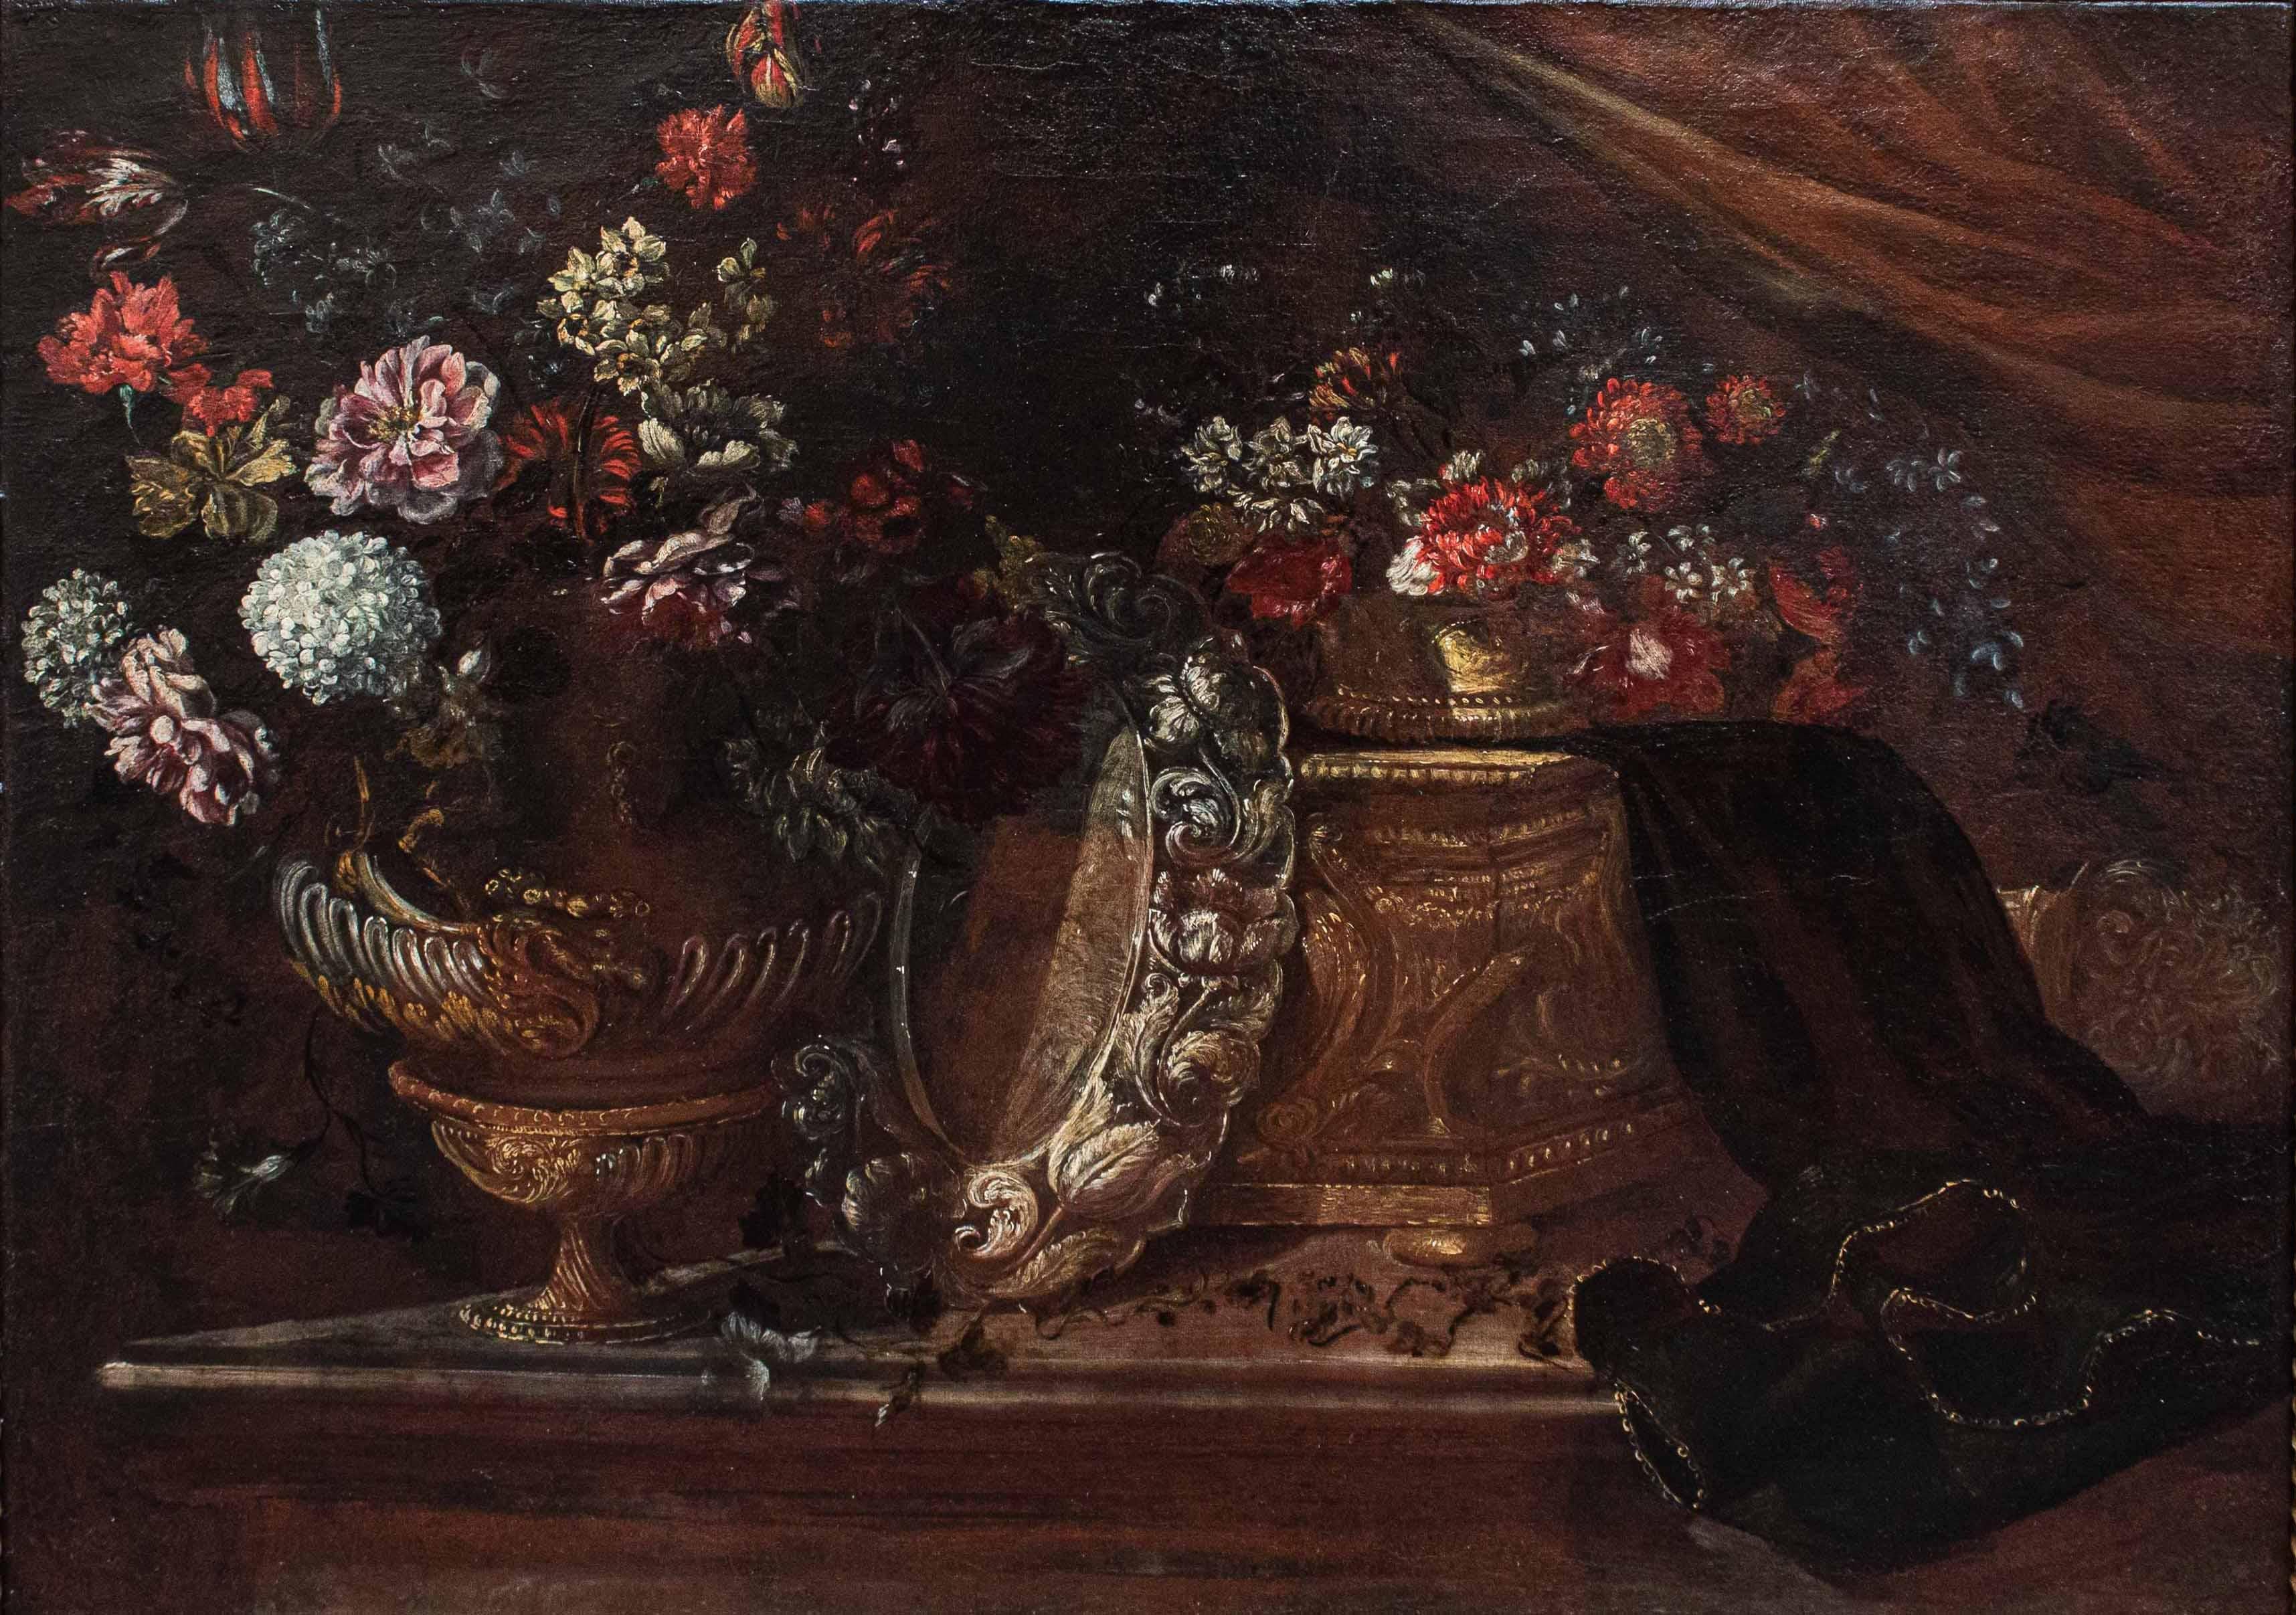 Roman School, 17th century

Still Life

Oil on canvas, 79 x 107 cm 

Framed, 93 x 121 cm

The work under scrutiny, depicting a majestic still life of flowers, is ascribed to the 17th-century Roman school, within a multifaceted artistic structure